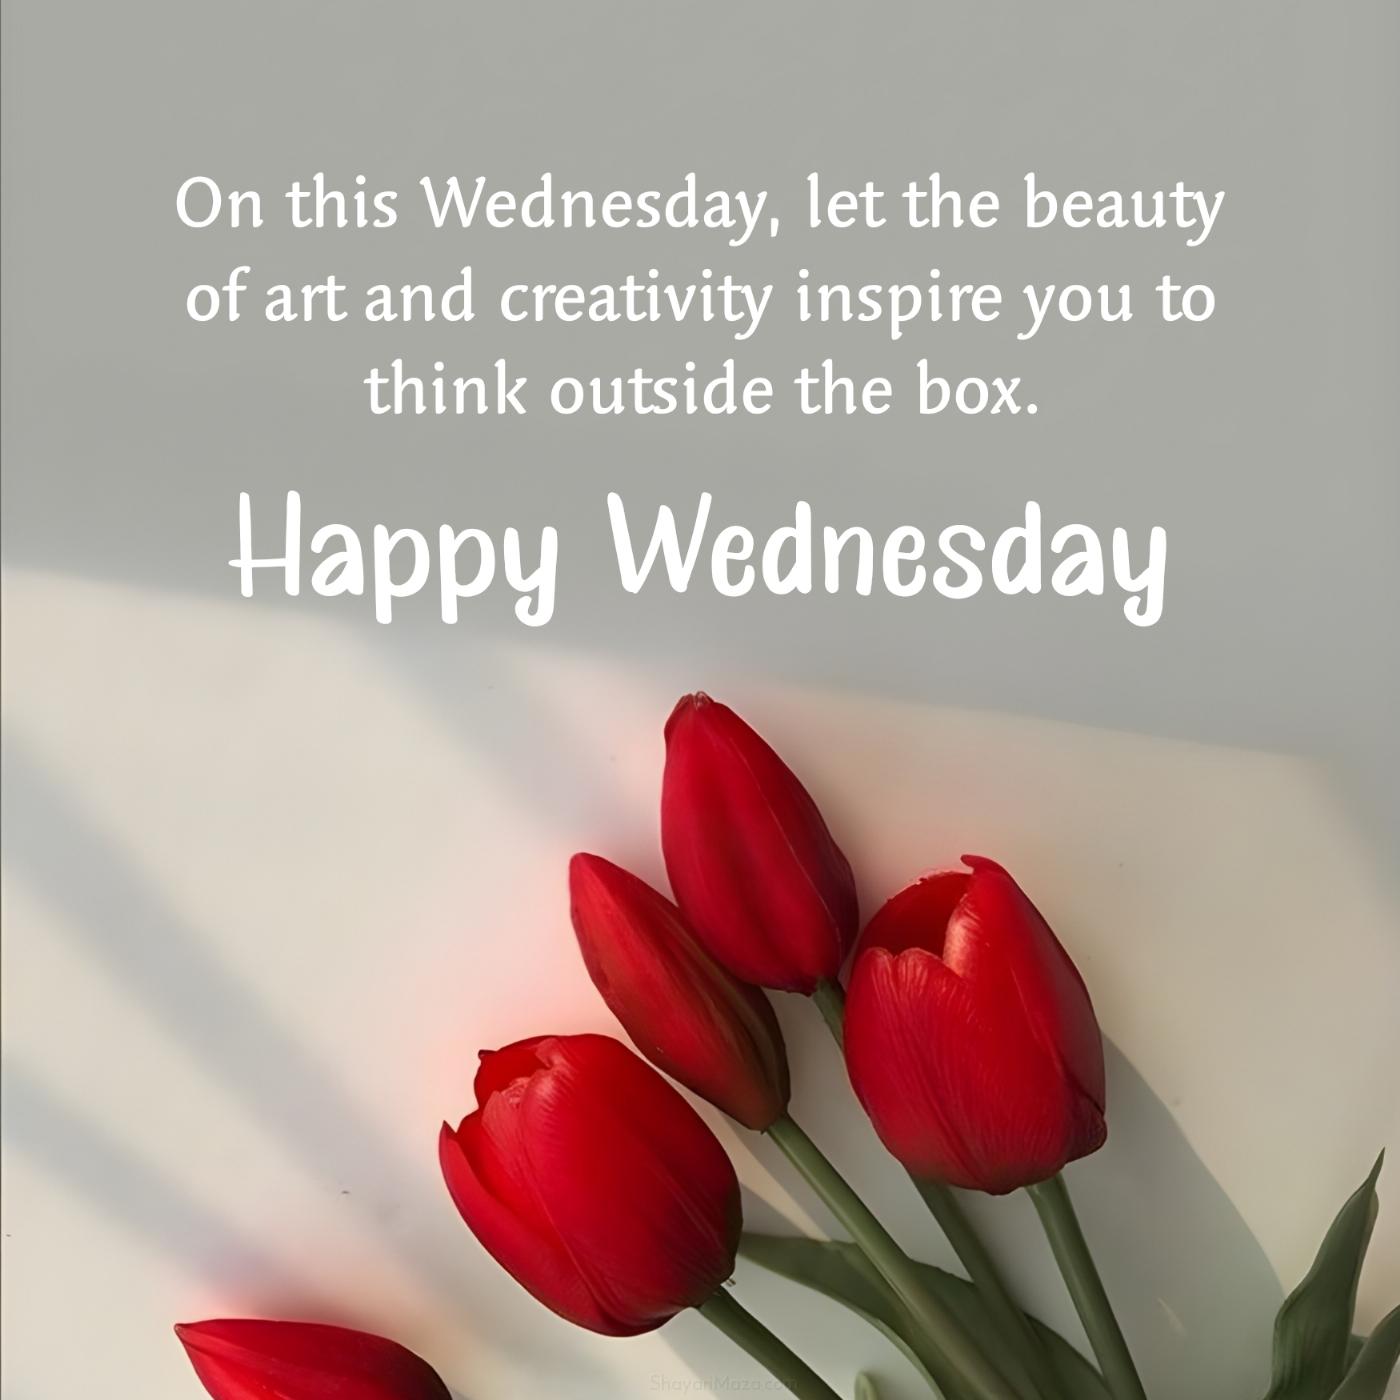 On this Wednesday let the beauty of art and creativity inspire you